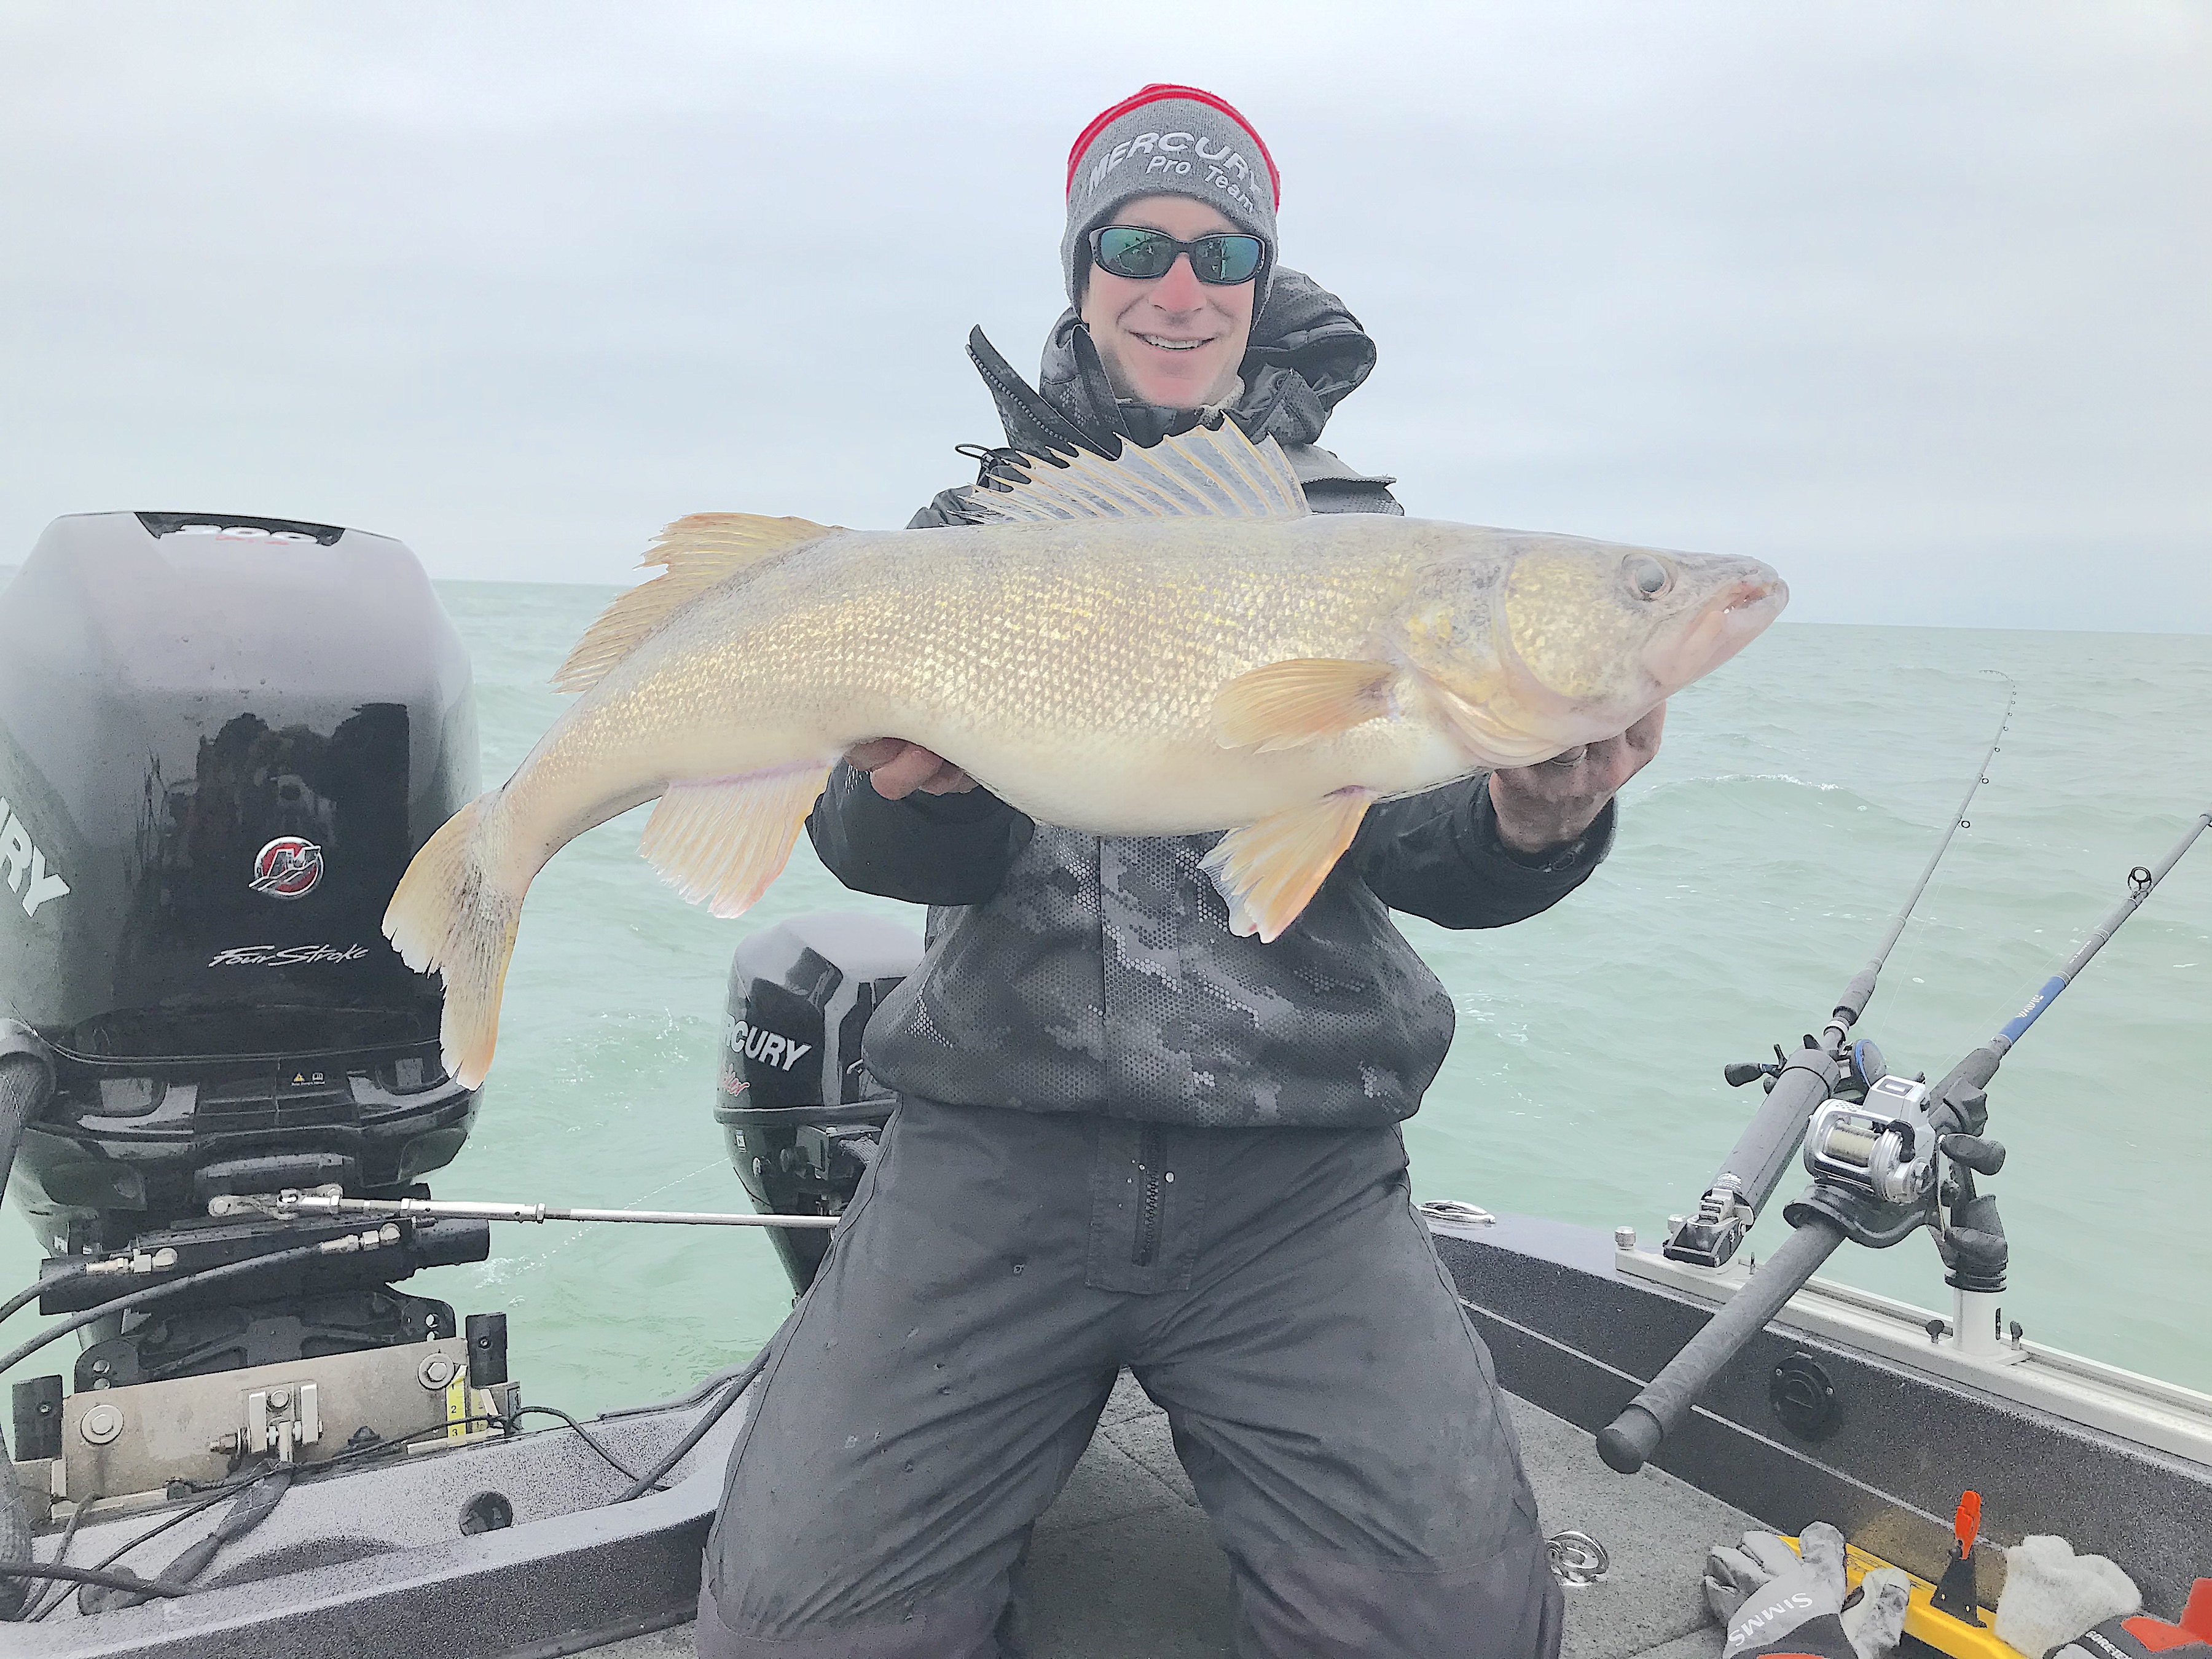 Fishing in the age of social distancing: Lake Erie is wide open 